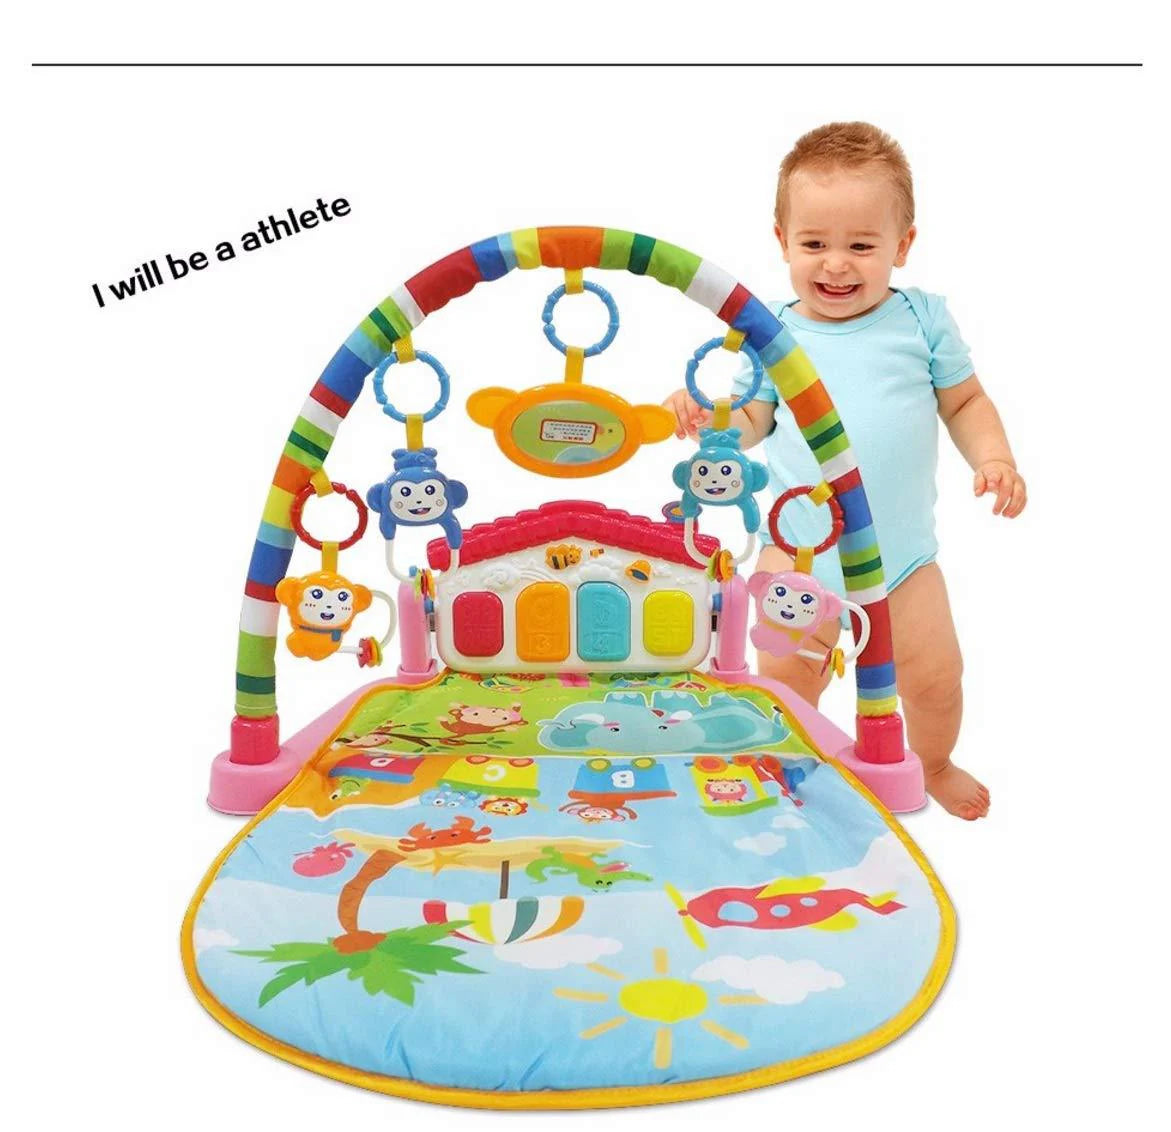 3 in 1 Baby Toddler Activity Play Gym Piano Fitness Rack Mat Play Gym 0m+